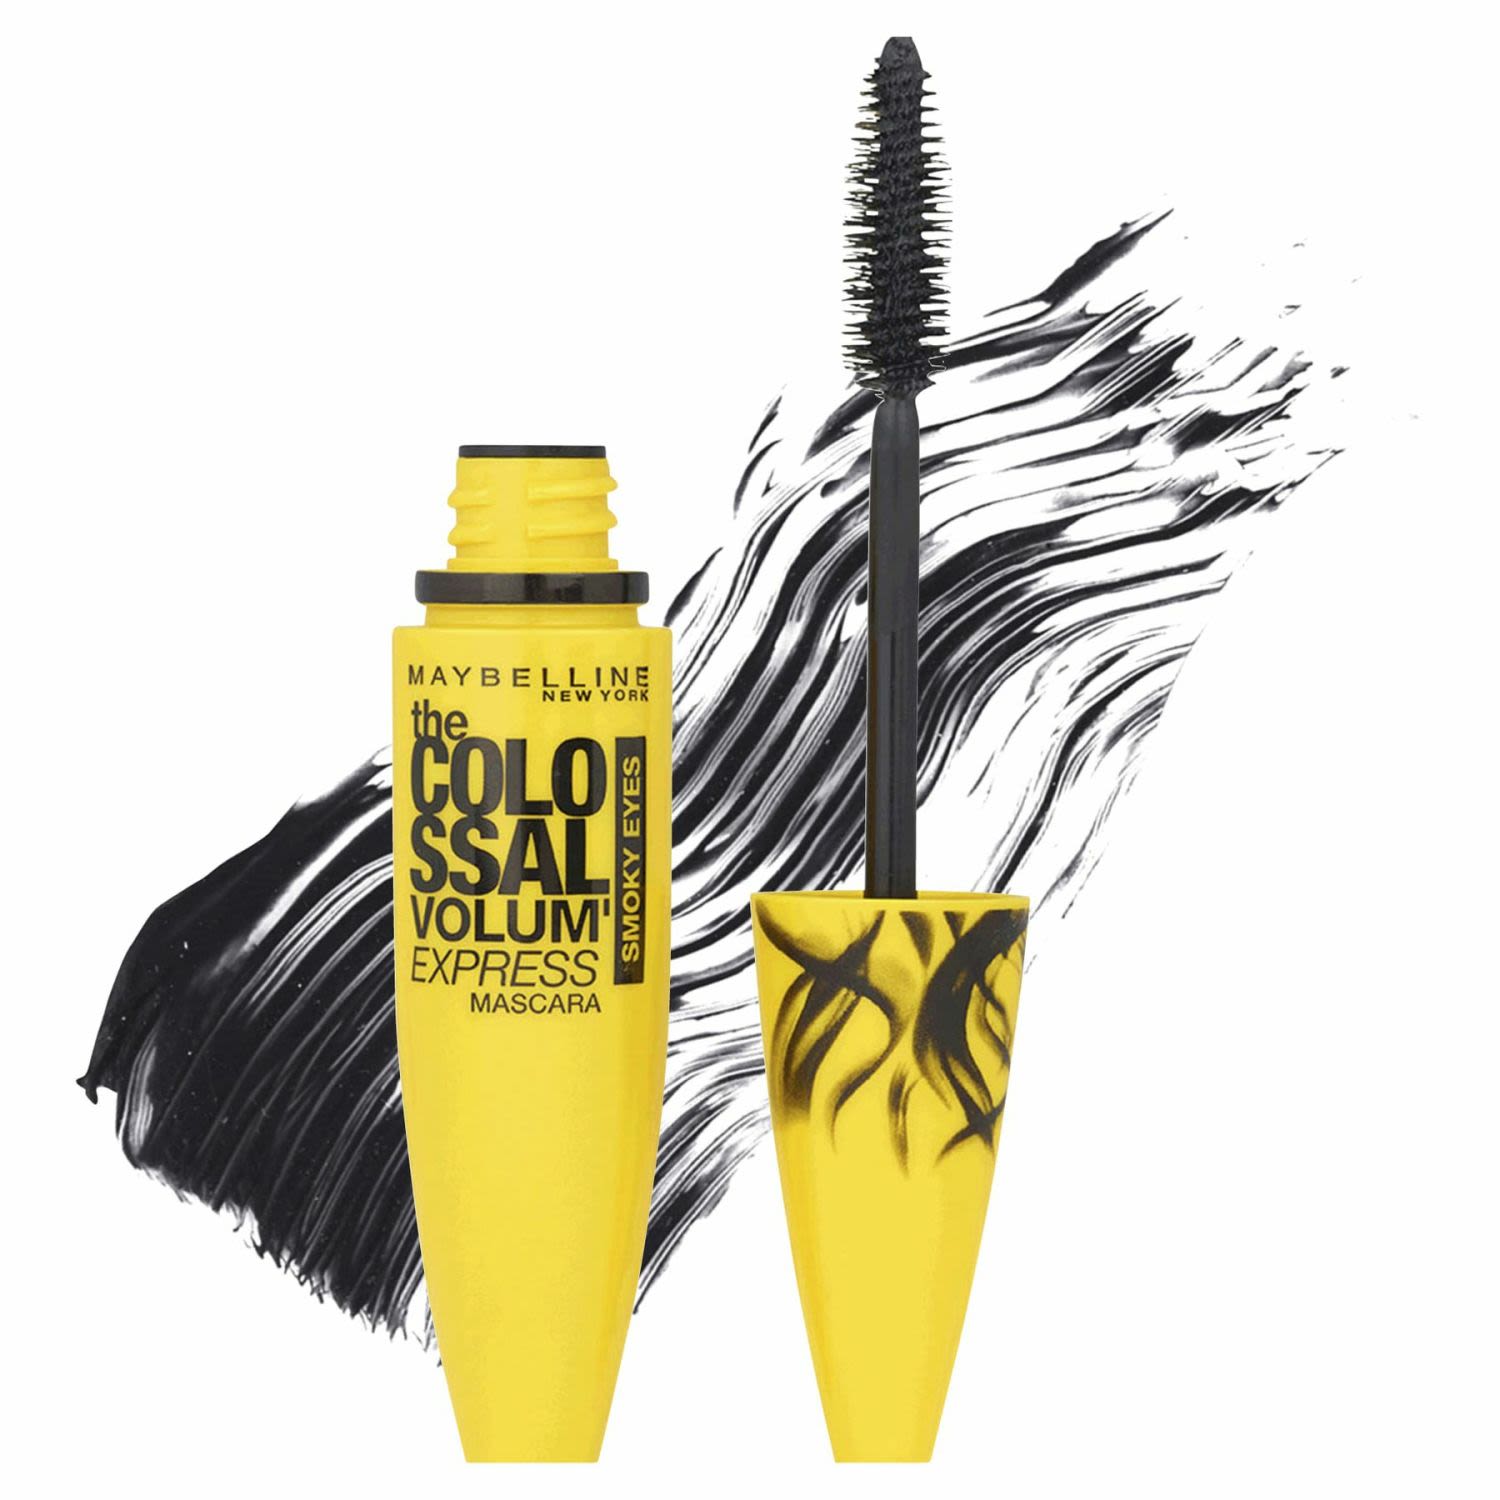 Volumizing black mascara coats the lashes with an intense black matte finish.  The oversized mega brush delivers big bold volume with one coat, without clumping.  Our smoky formula creates intensely black lashes for a black kohl effect.<br /> <br />